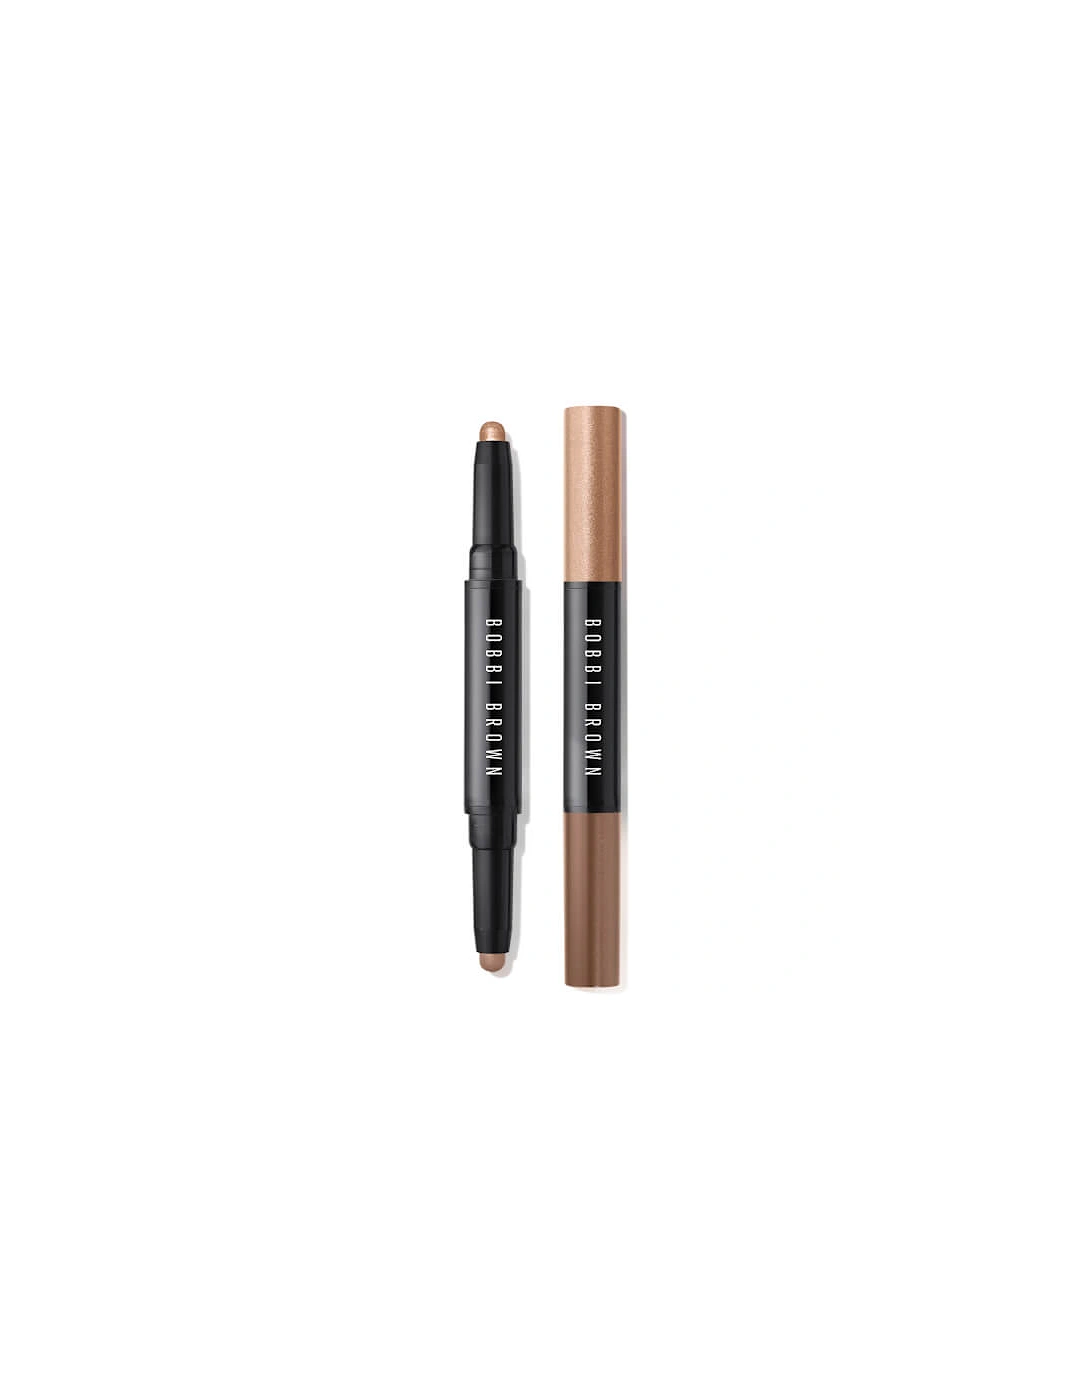 Long-Wear Cream Shadow Stick Duo - Golden Pink / Taupe, 2 of 1